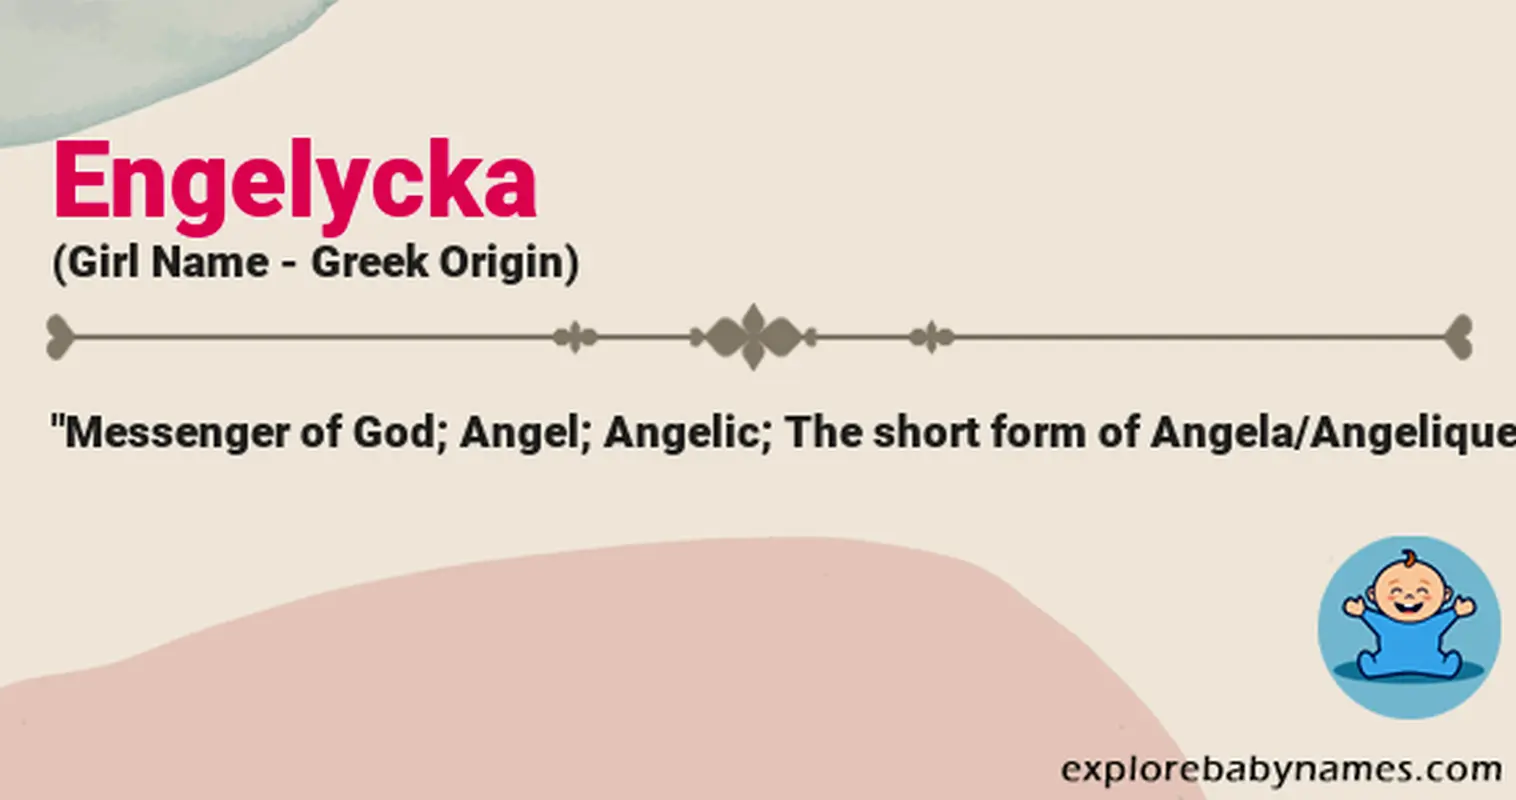 Meaning of Engelycka